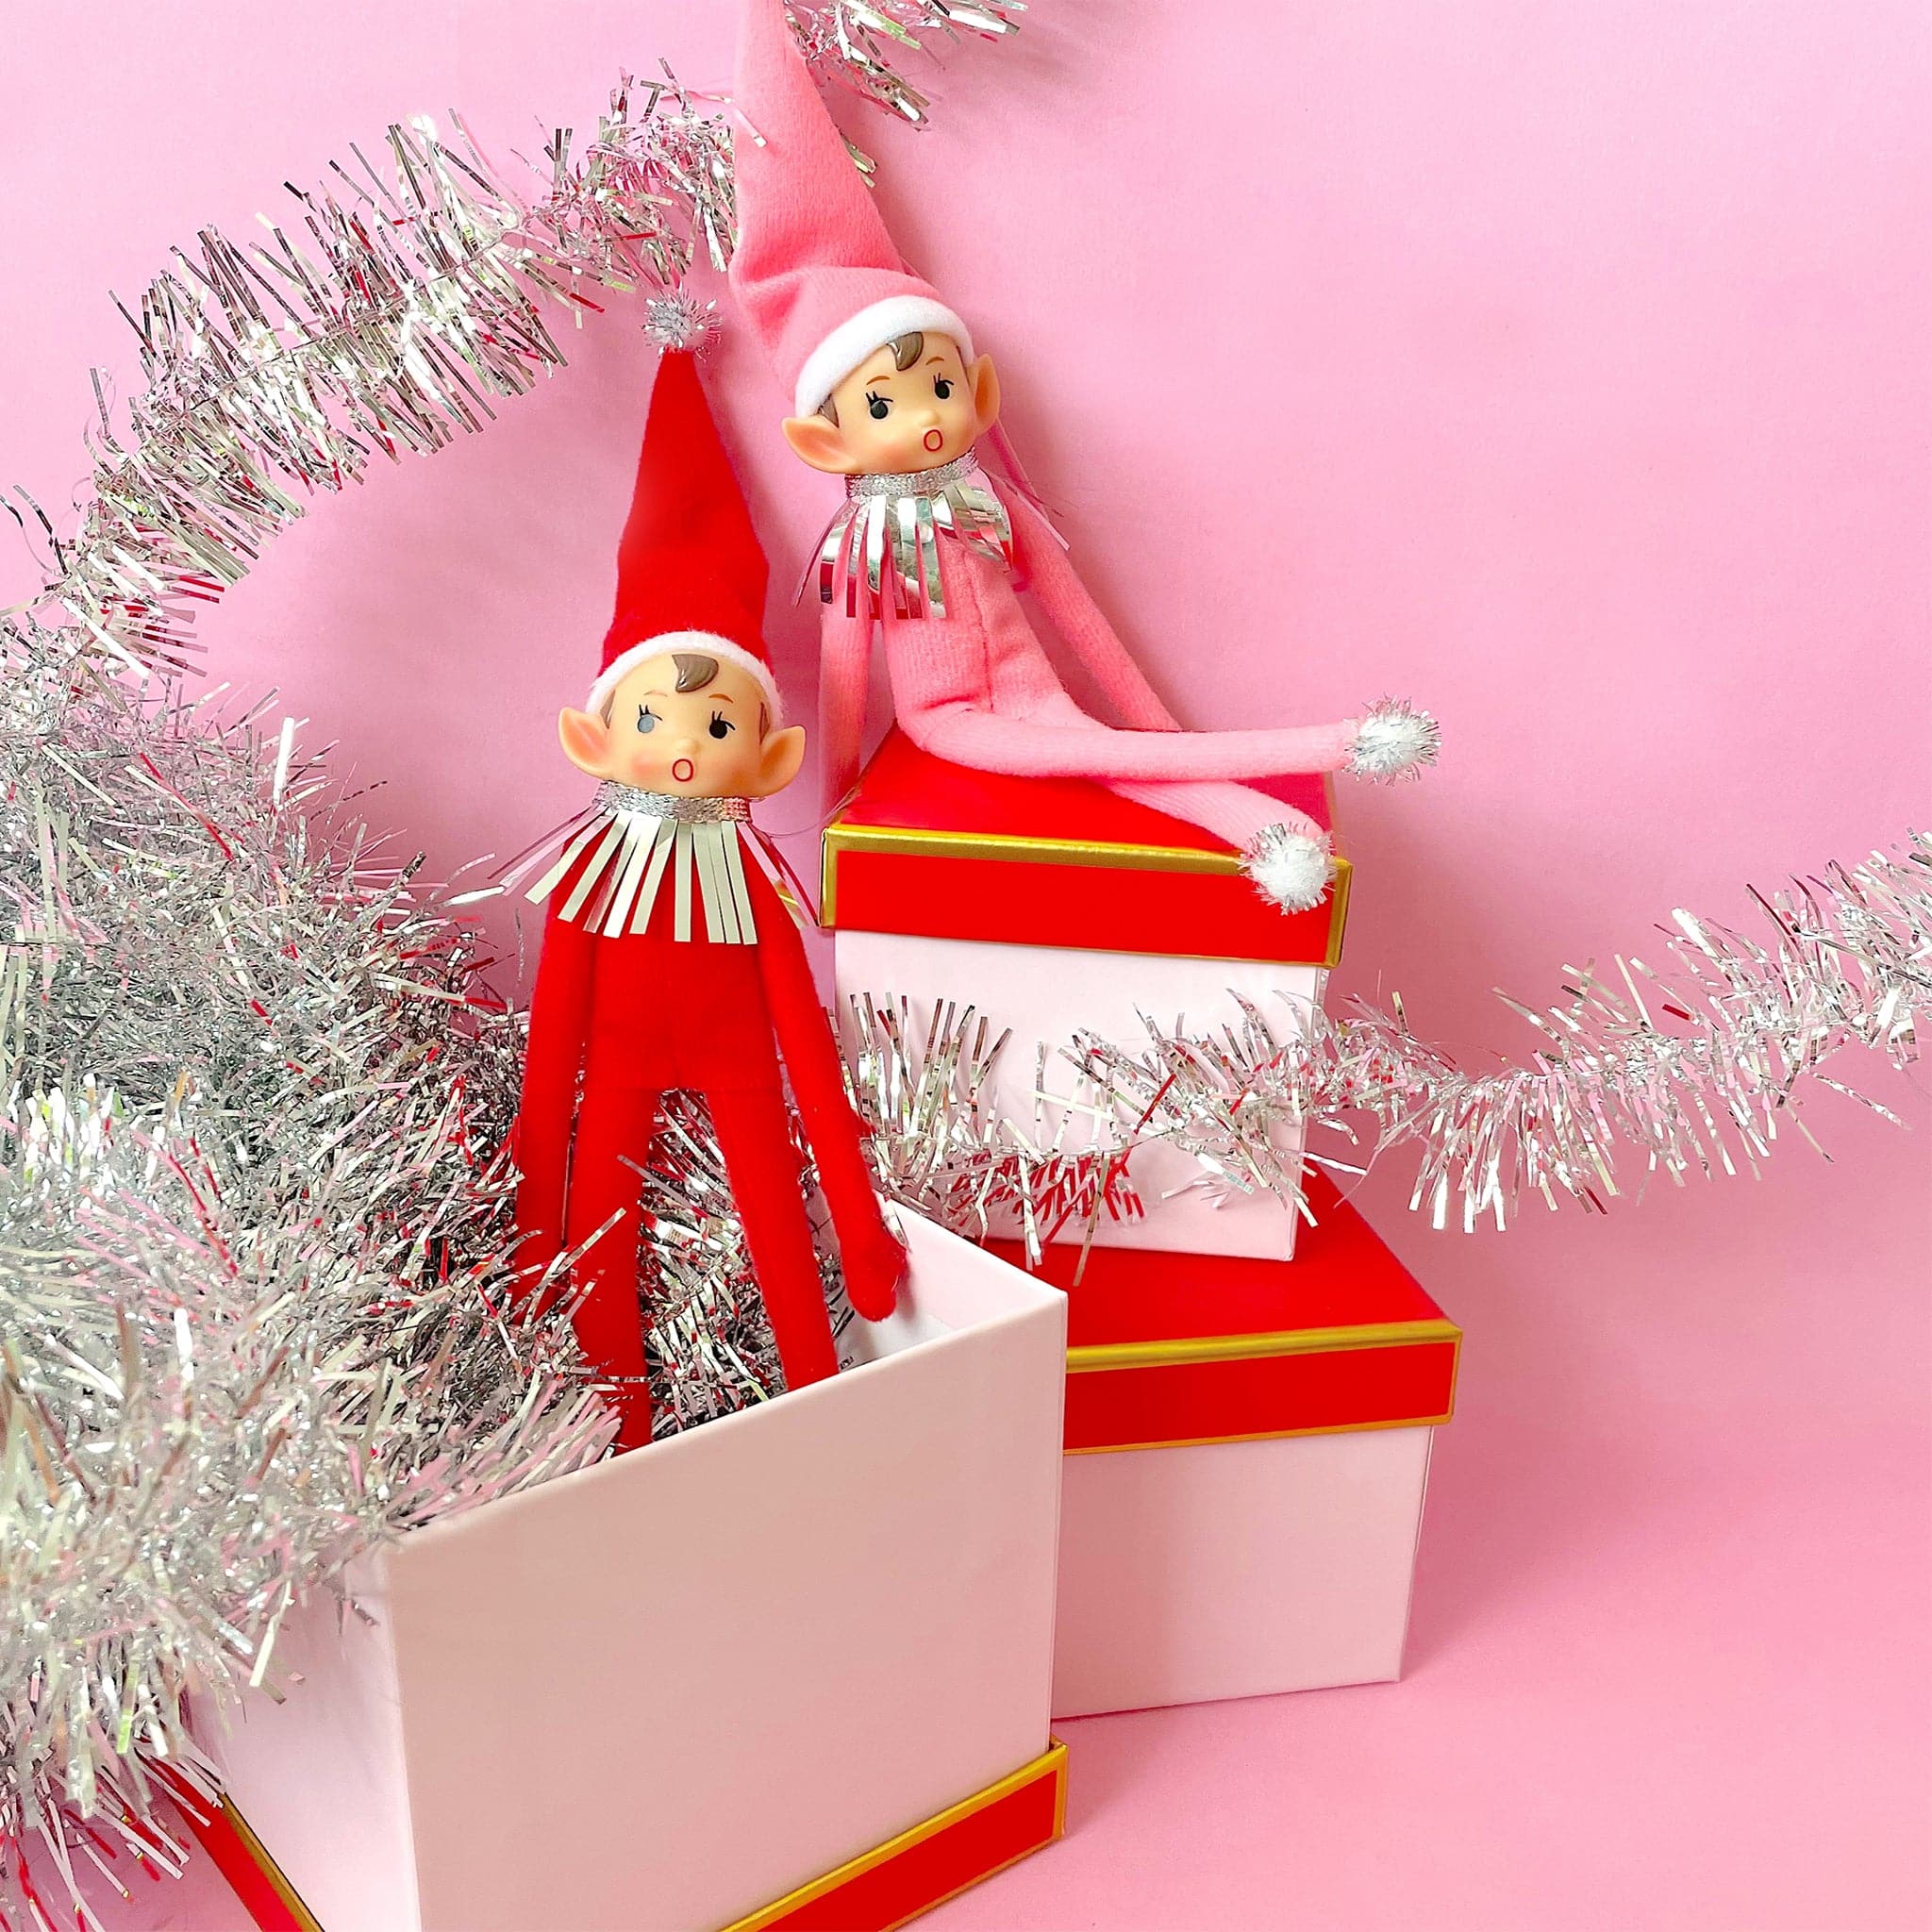 On a cream background is a red elf ornament with bendy arms and legs and a green loop for hanging and photographed next to the pink version.